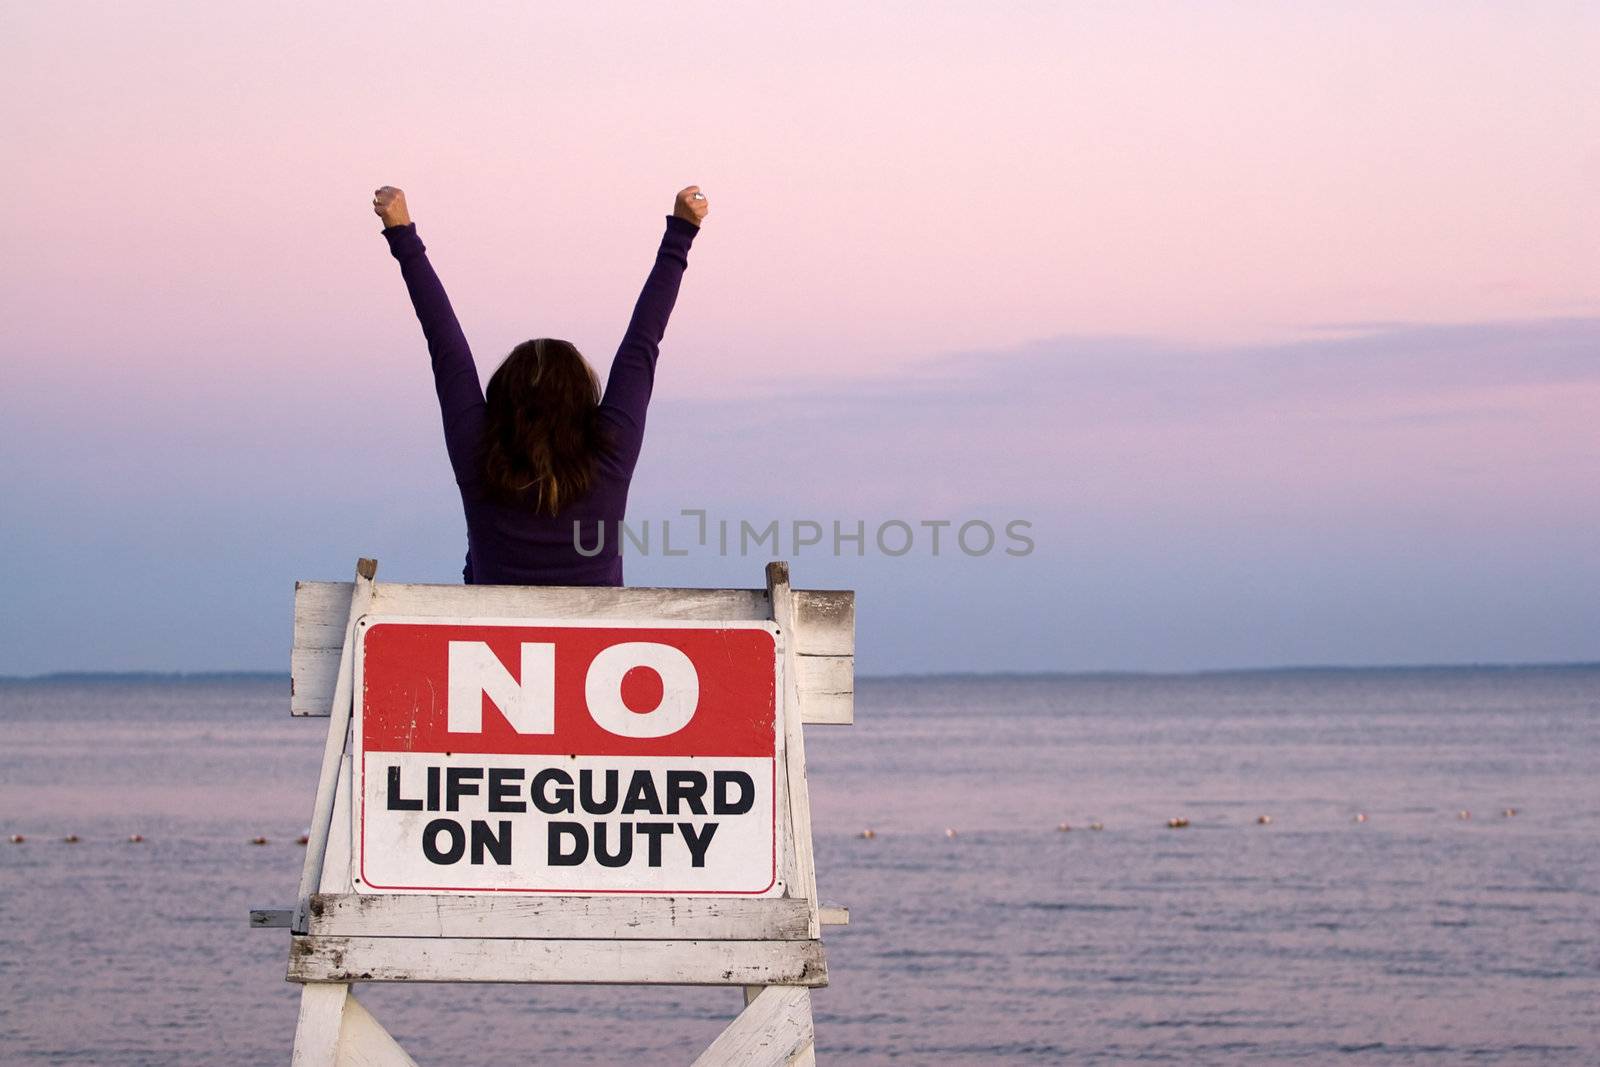 A woman holds her arms up in the air while seated in a vacant lifeguard chair at the beach.